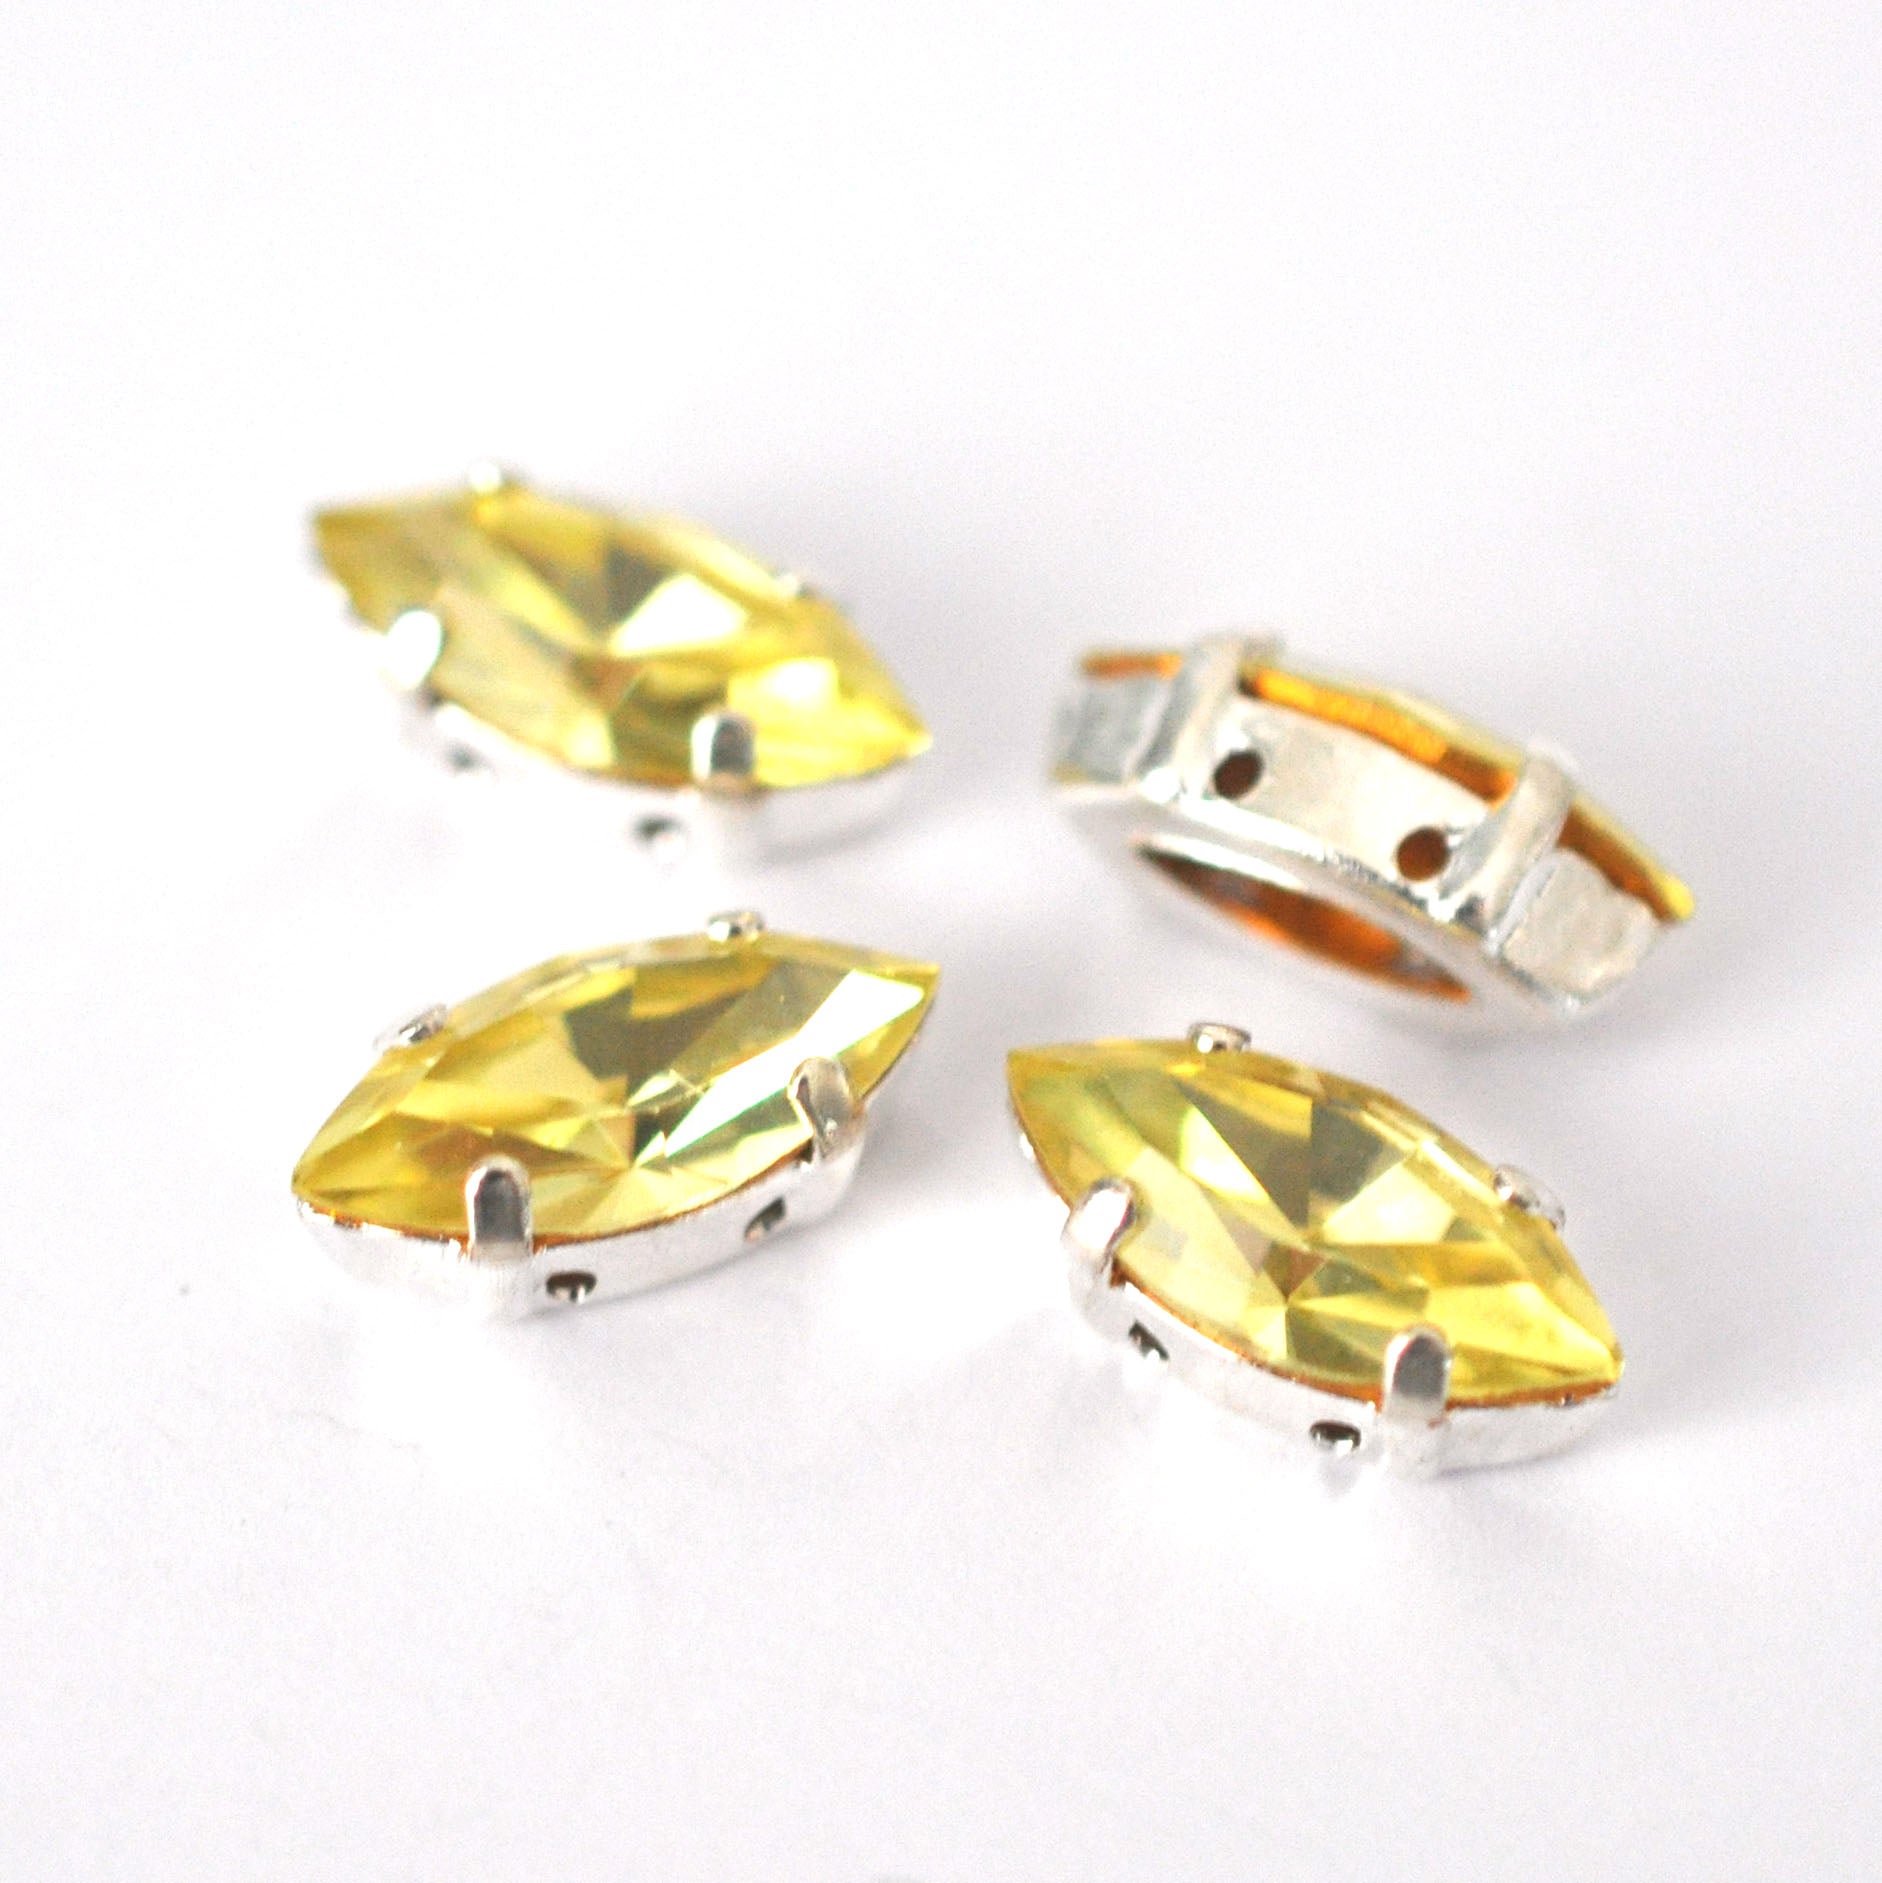 Jonquil 15x7mm Navette Sew On Crystals - 4 Pieces